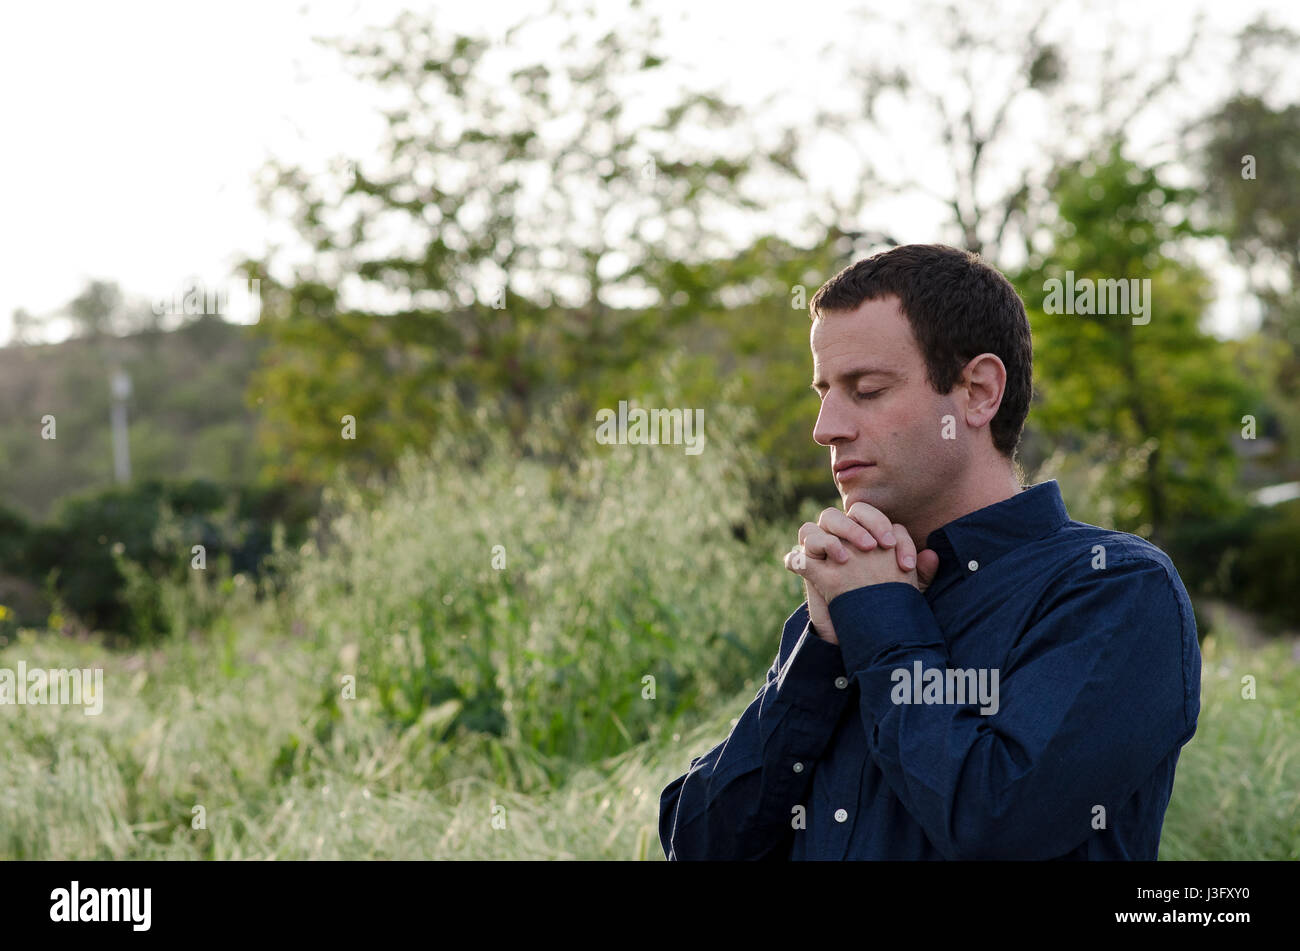 Man praying alone outside in a grassy field with hands folded and eyes closed. Stock Photo